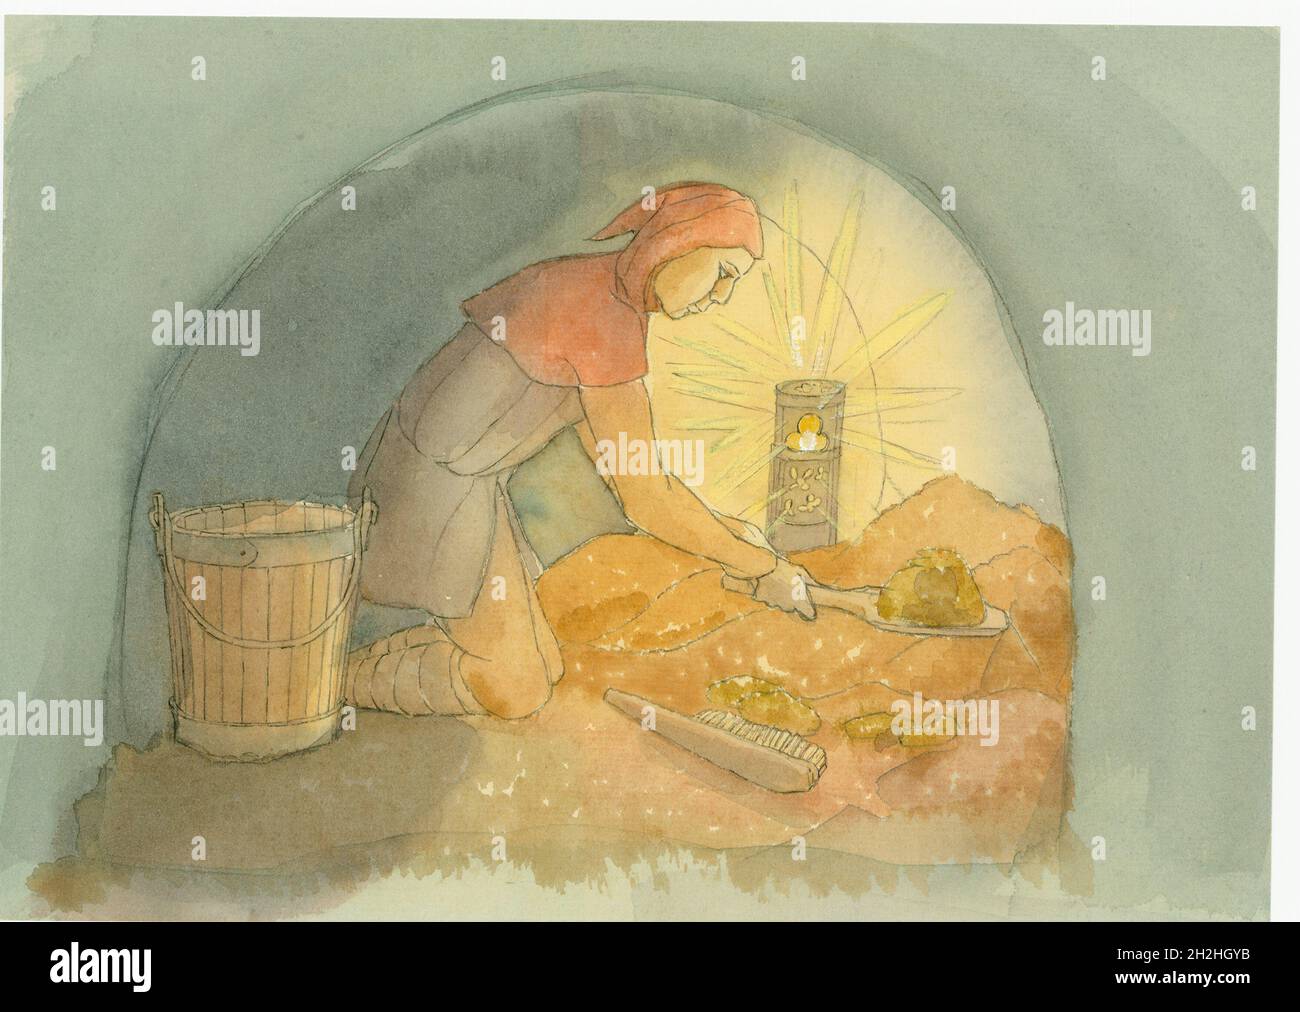 A medieval gongfermour, or gong farmer, at work, 2004. A reconstruction illustration of a medieval gongfermour, or gong farmer, at work. A gongfermour is a Tudor term that describes someone whose job entailed removing human excrement from cesspits and privies. They only worked at night, and were often called 'nightmen', and the collections as 'night soil'. The waste had to be taken out of town boundaries. The gongfermour is working at night by candlelight, and is possibly in a cesspit or privvy. The illustration was made for the educational department to use on medieval locations. Stock Photo